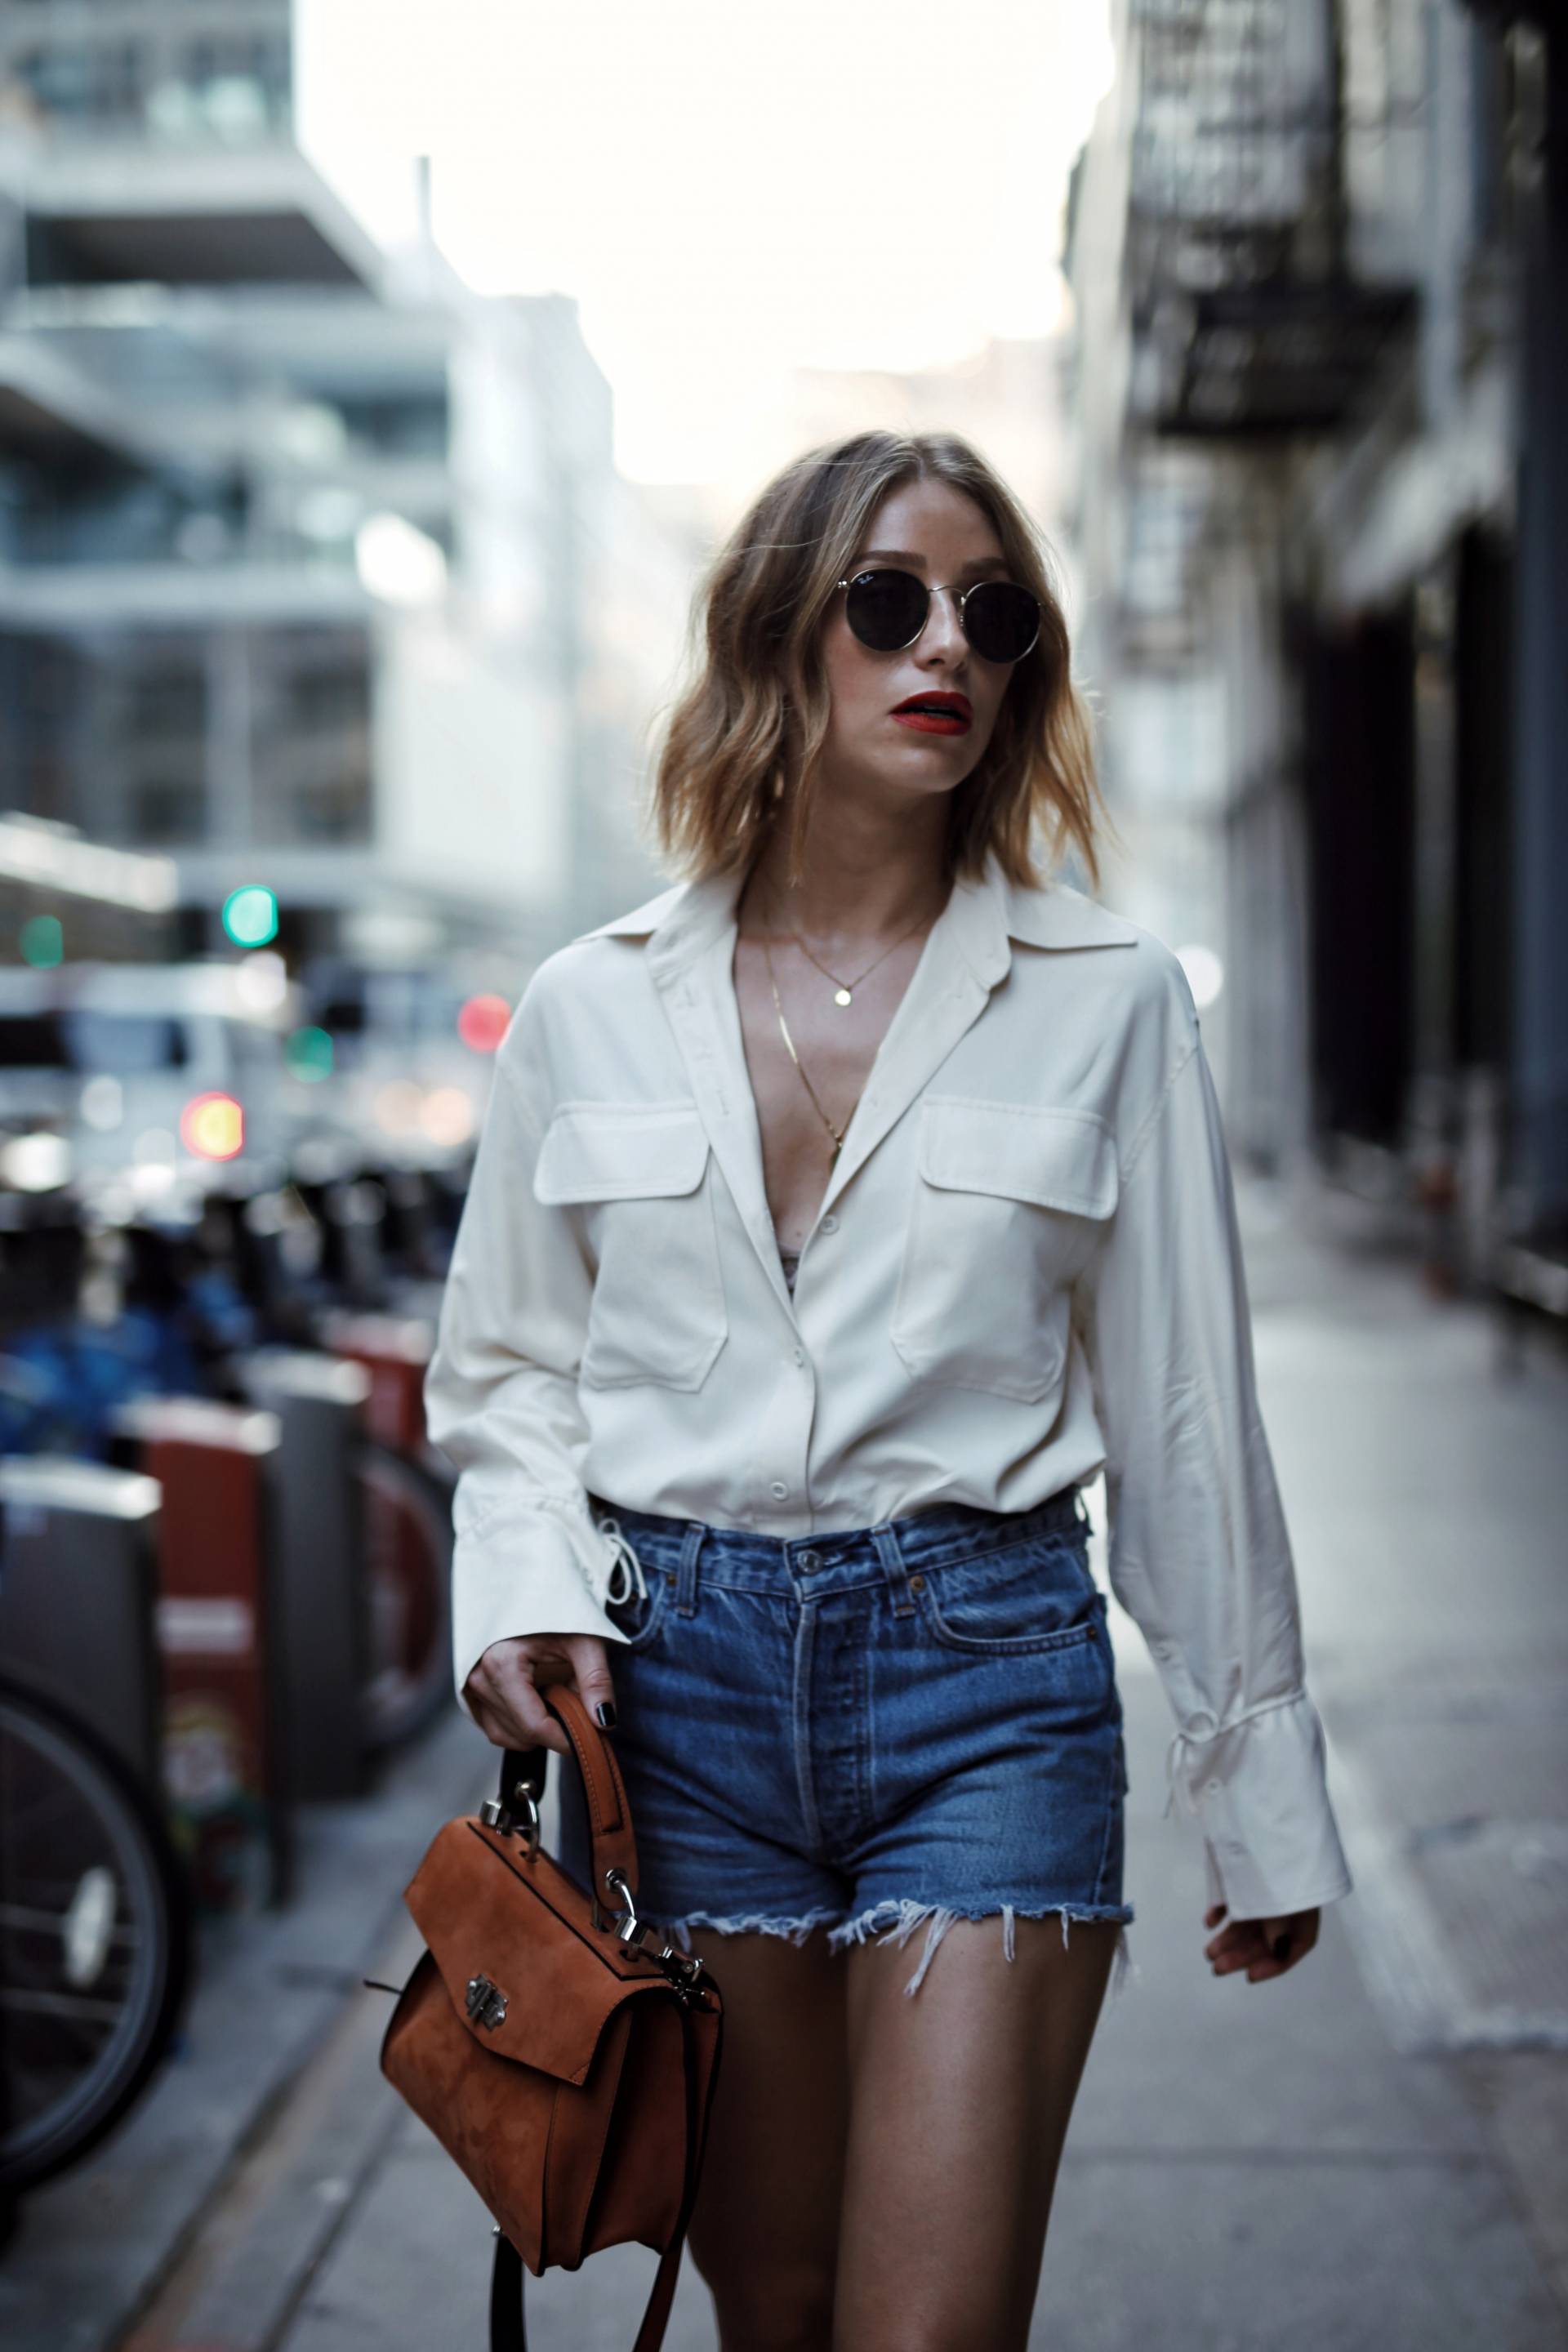 Style and beauty blogger Jill Lansky of the August Diaries on how to dress outside your comfort zone in Aritzia blouse, levi's shorts, proenza schouler hava bag